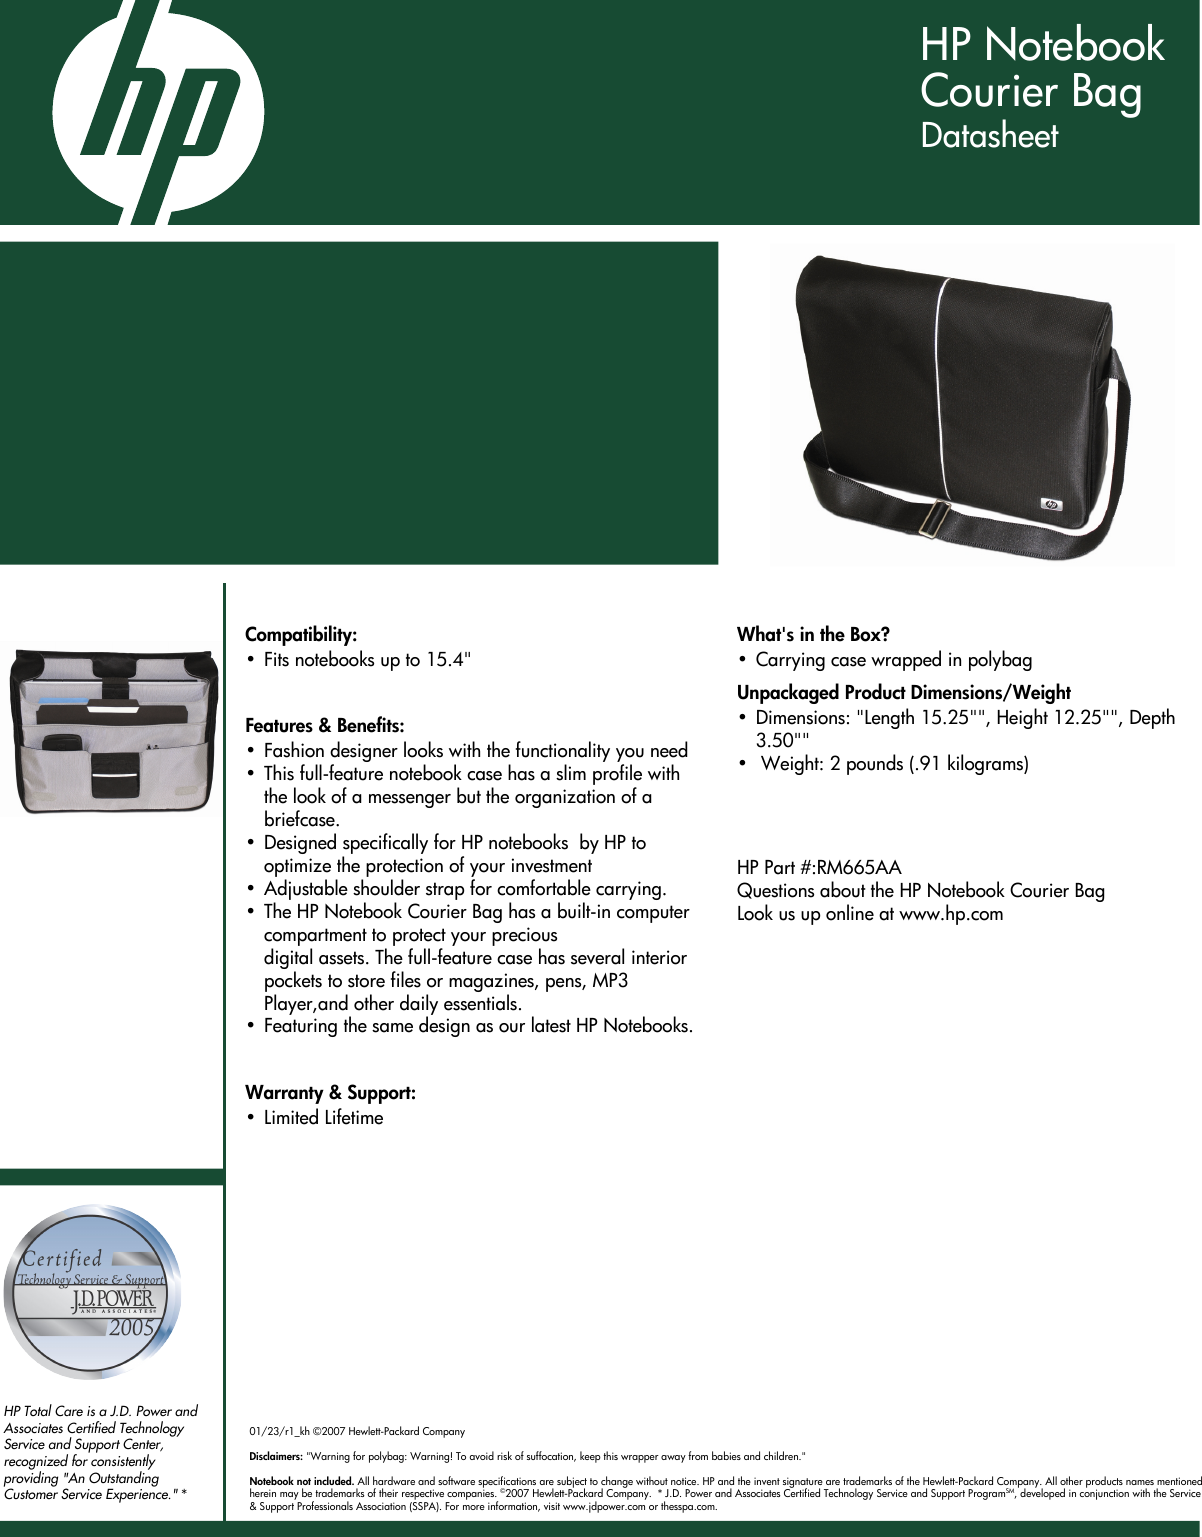 Page 1 of 1 - HP Pavilion Data Sheet Notebook Courier Bag - Datasheet C01621847